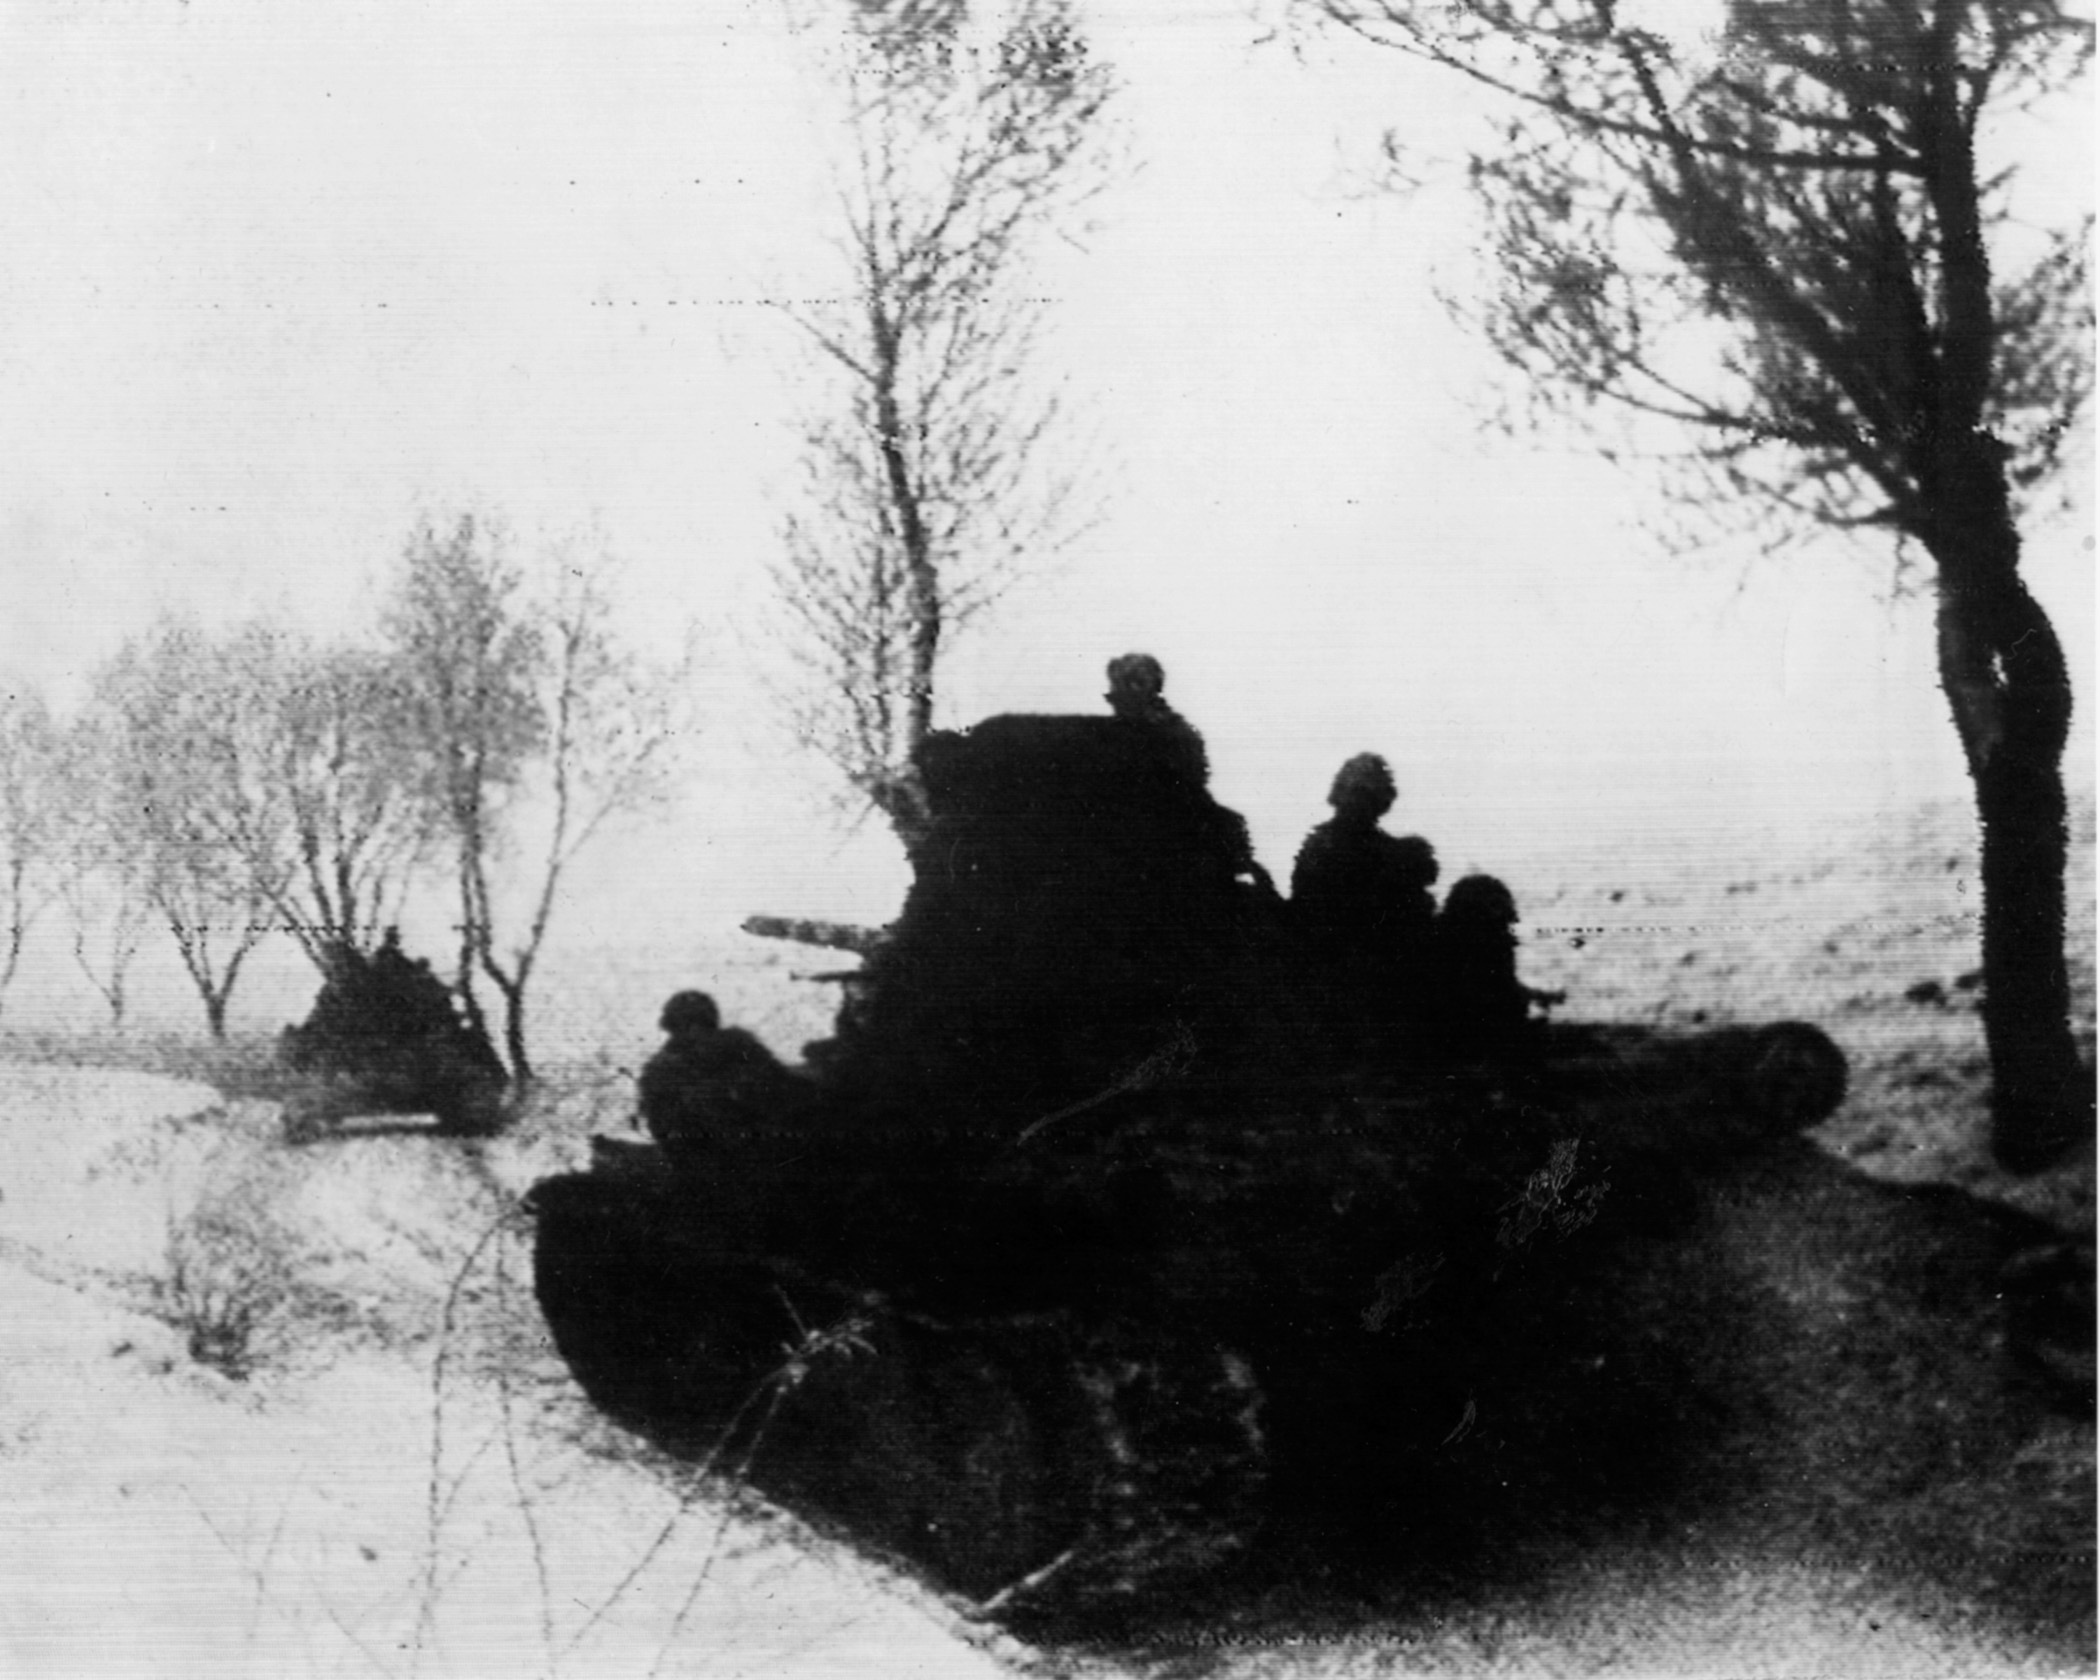 Red Army tanks loaded with infantrymen advance slowly across a snow-covered winter landscape.